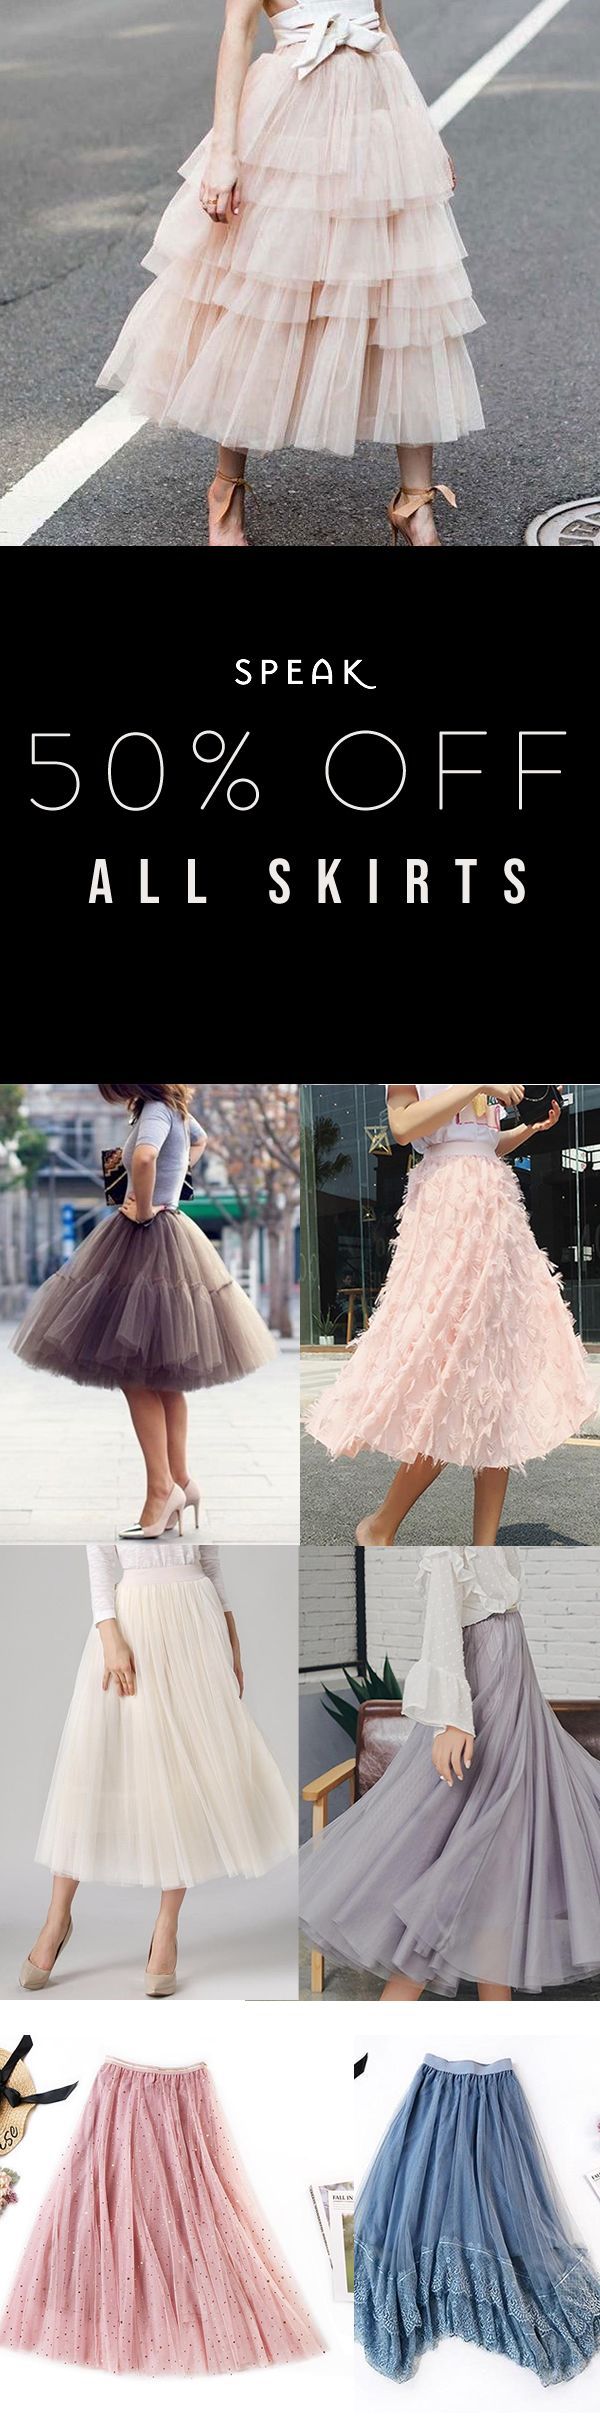 Tulle Skirt Sale! 50% Off (or more) all skirts at Speak. -   12 short work style
 ideas